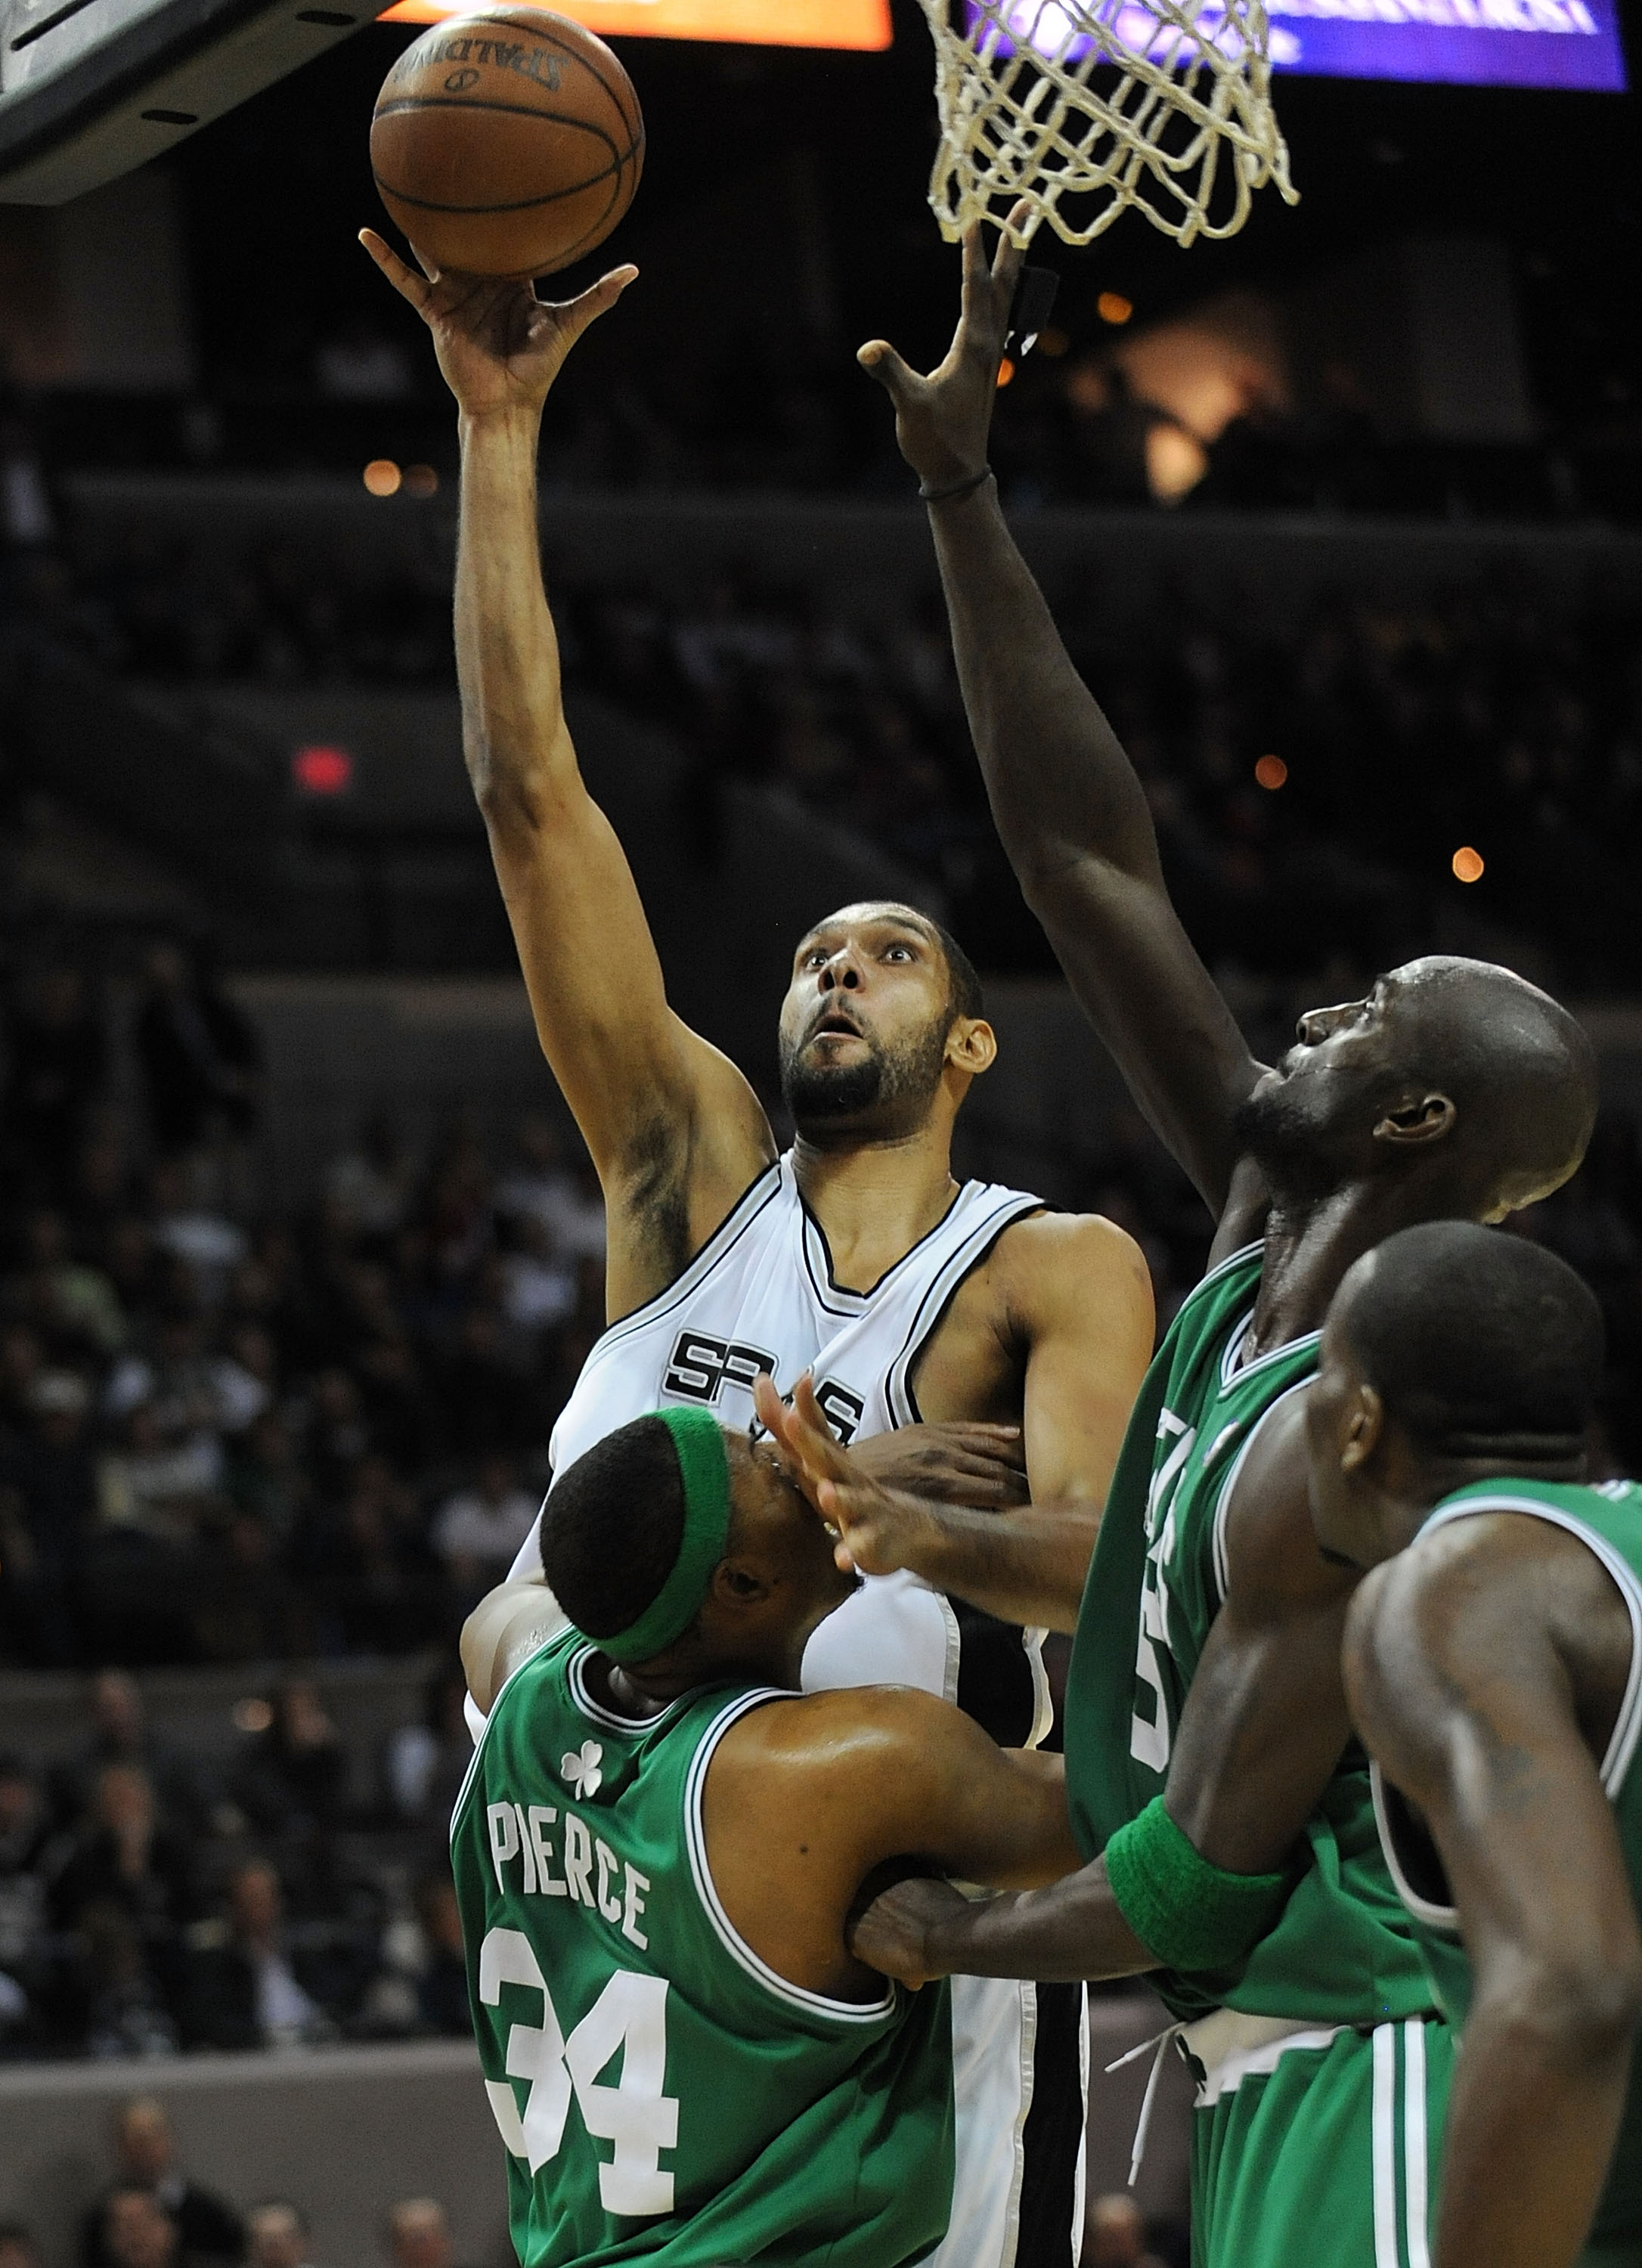 SAN ANTONIO - DECEMBER 03:  Forward Tim Duncan #21 of the San Antonio Spurs takes a shot against Paul Pierce #34 and Kevin Garnett #5 of the Boston Celtics on December 3, 2009 at AT&T Center in San Antonio, Texas.  NOTE TO USER: User expressly acknowledge